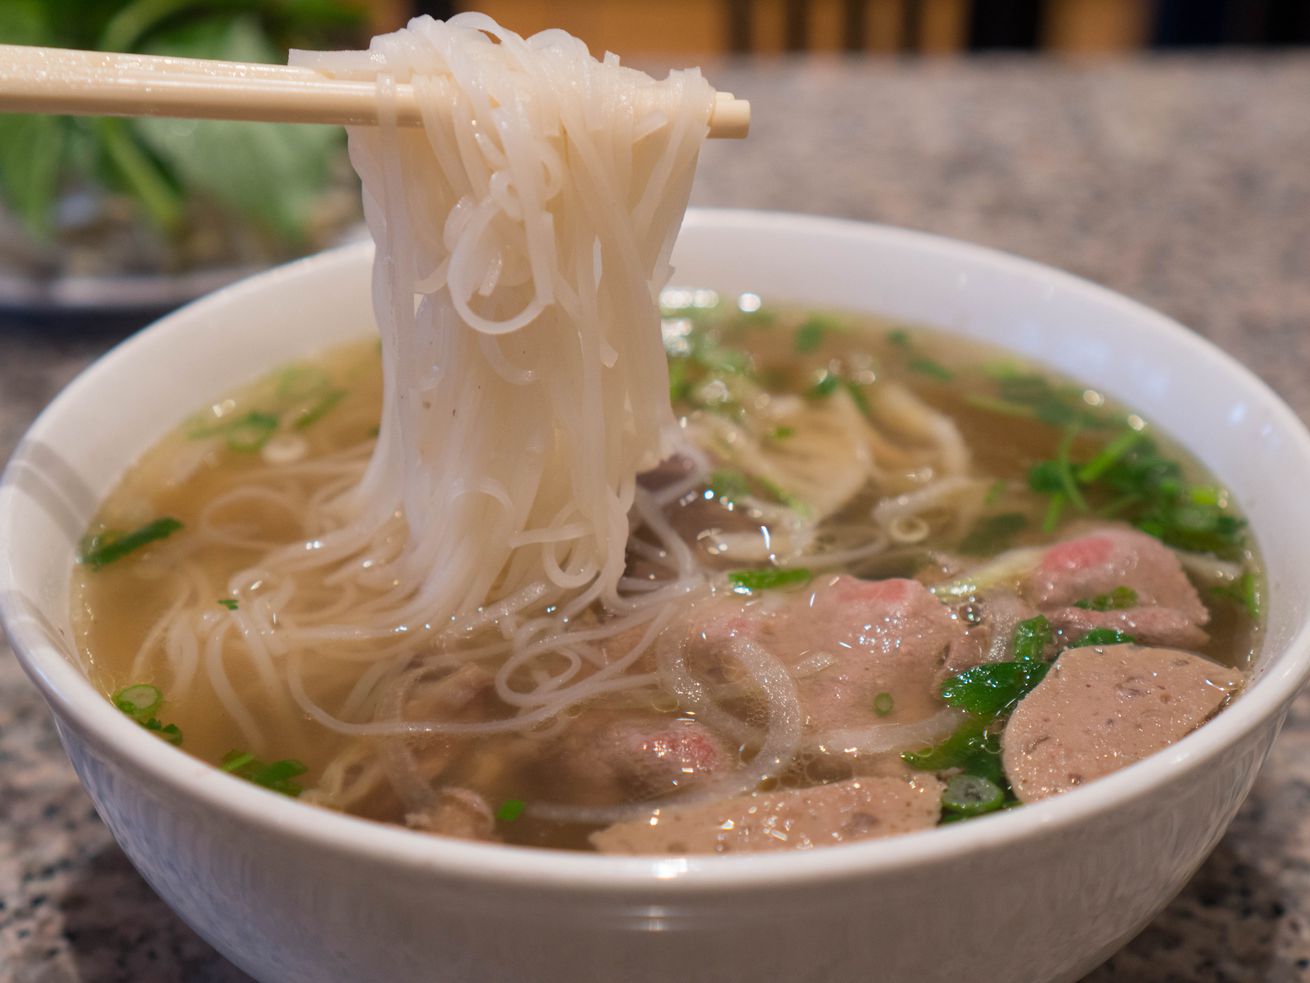 A pair of chopsticks hold up a tangle of noodles above a bowl of pho, with pieces of tripe and meatballs floating among chopped cilantro and basil